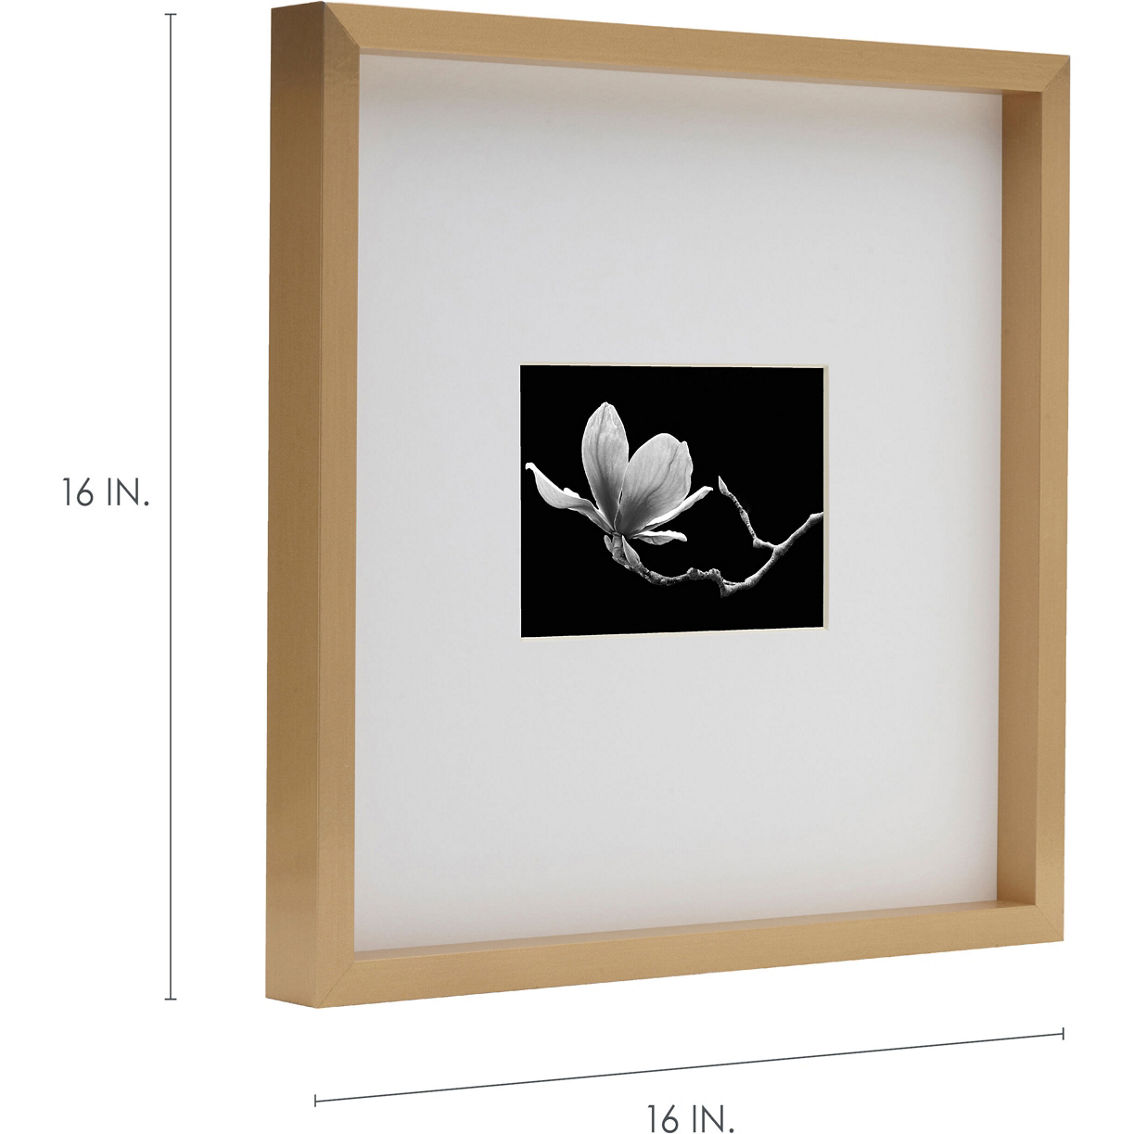 Mikasa Black Gallery 15 x 15 in. Frame Matted to 5 x 7 in. - Image 3 of 5